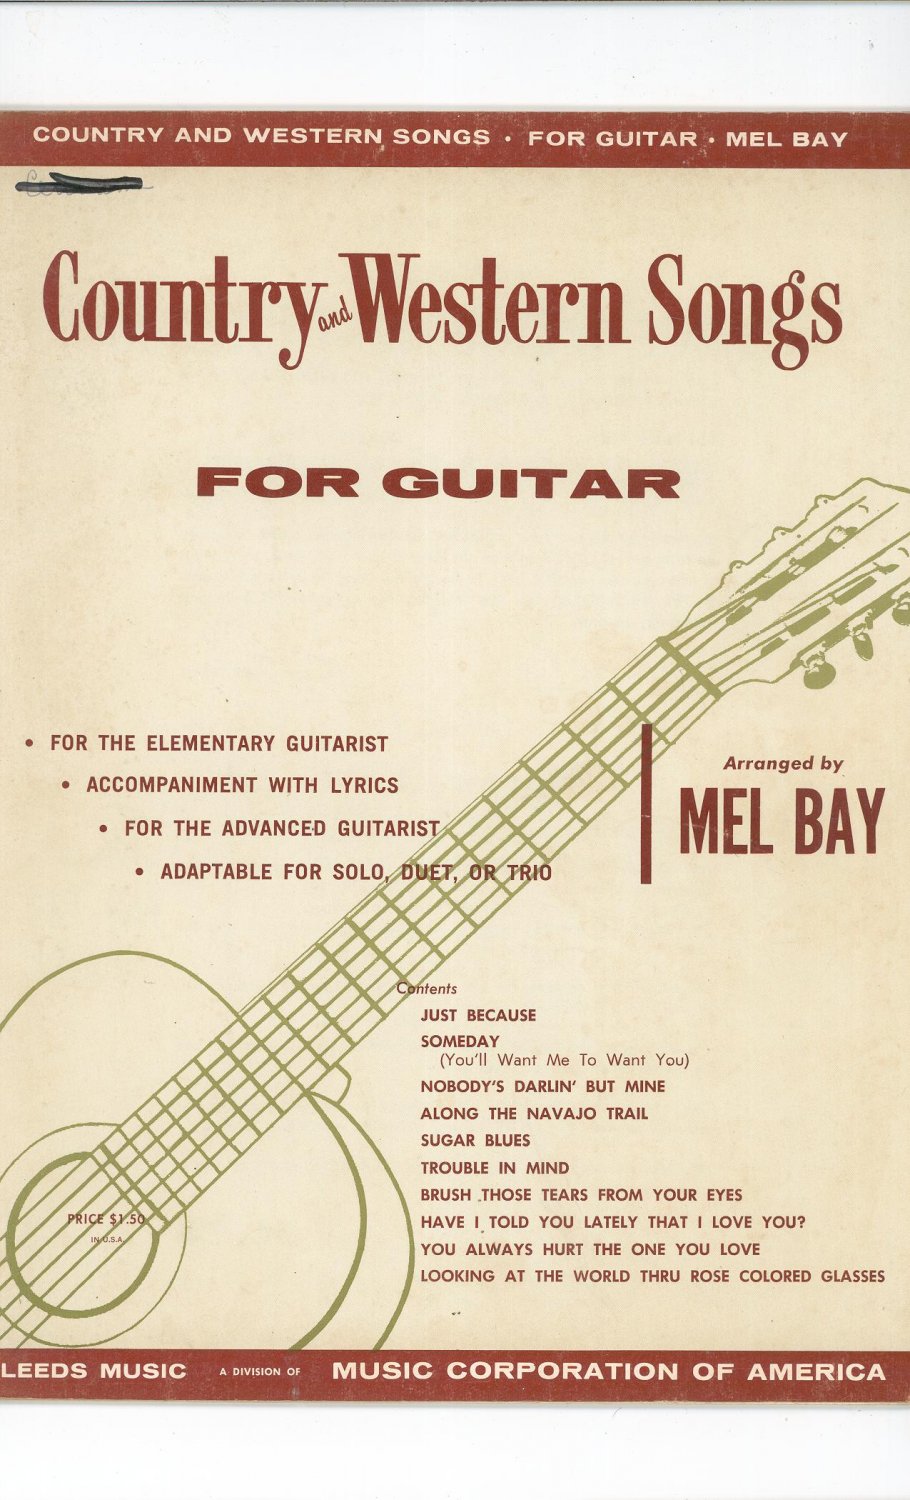 Country And Western Songs For Guitar By Mel Bay Vintage Leeds Music